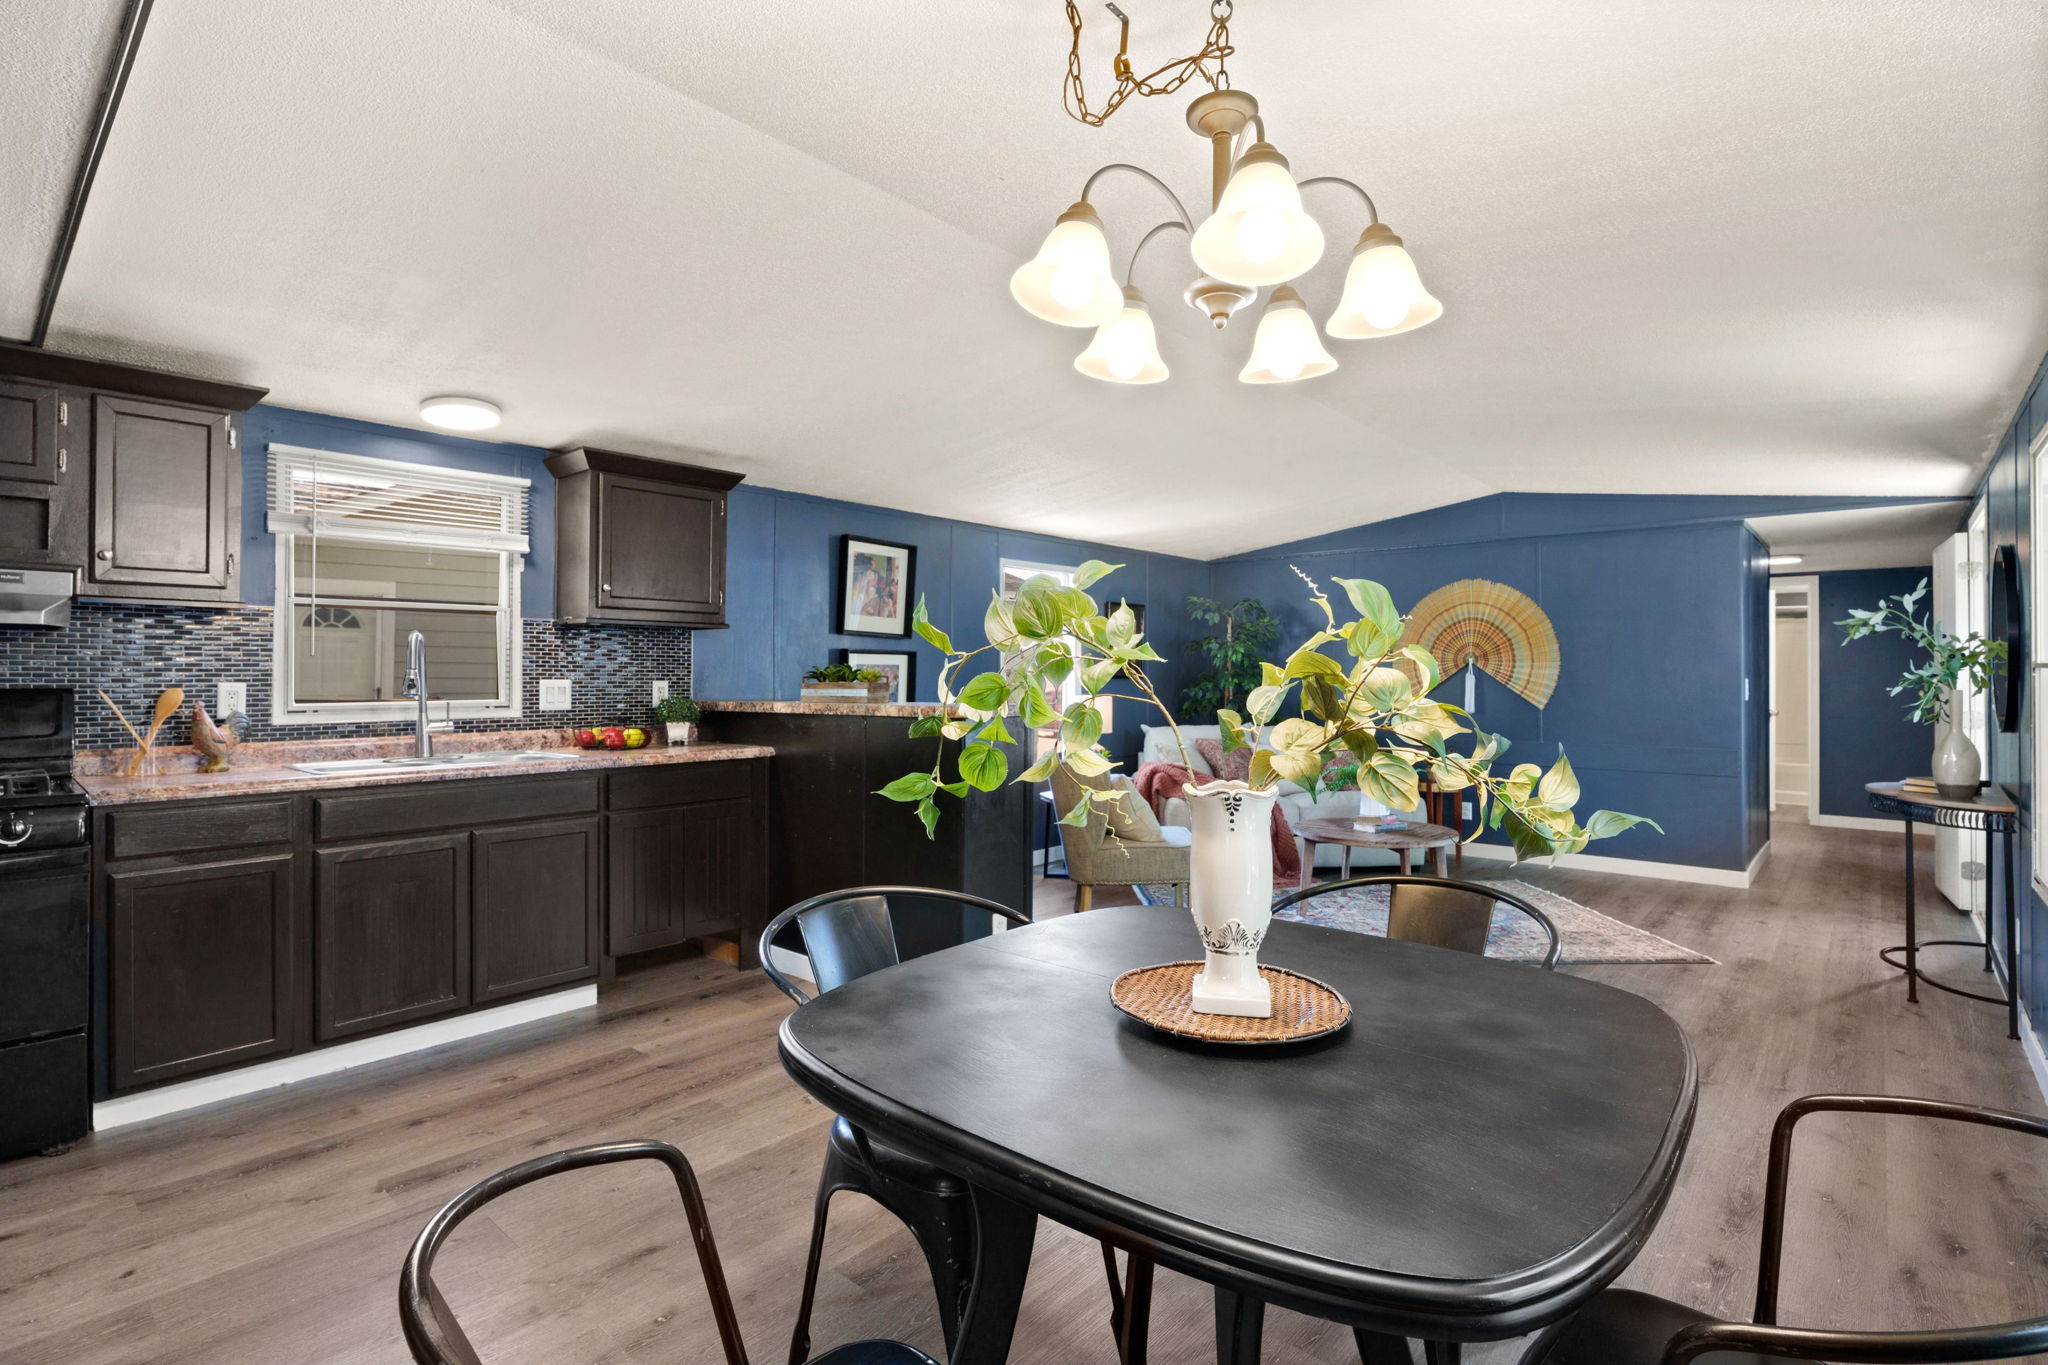 Eat-in kitchen with a spacious area for a dining table.